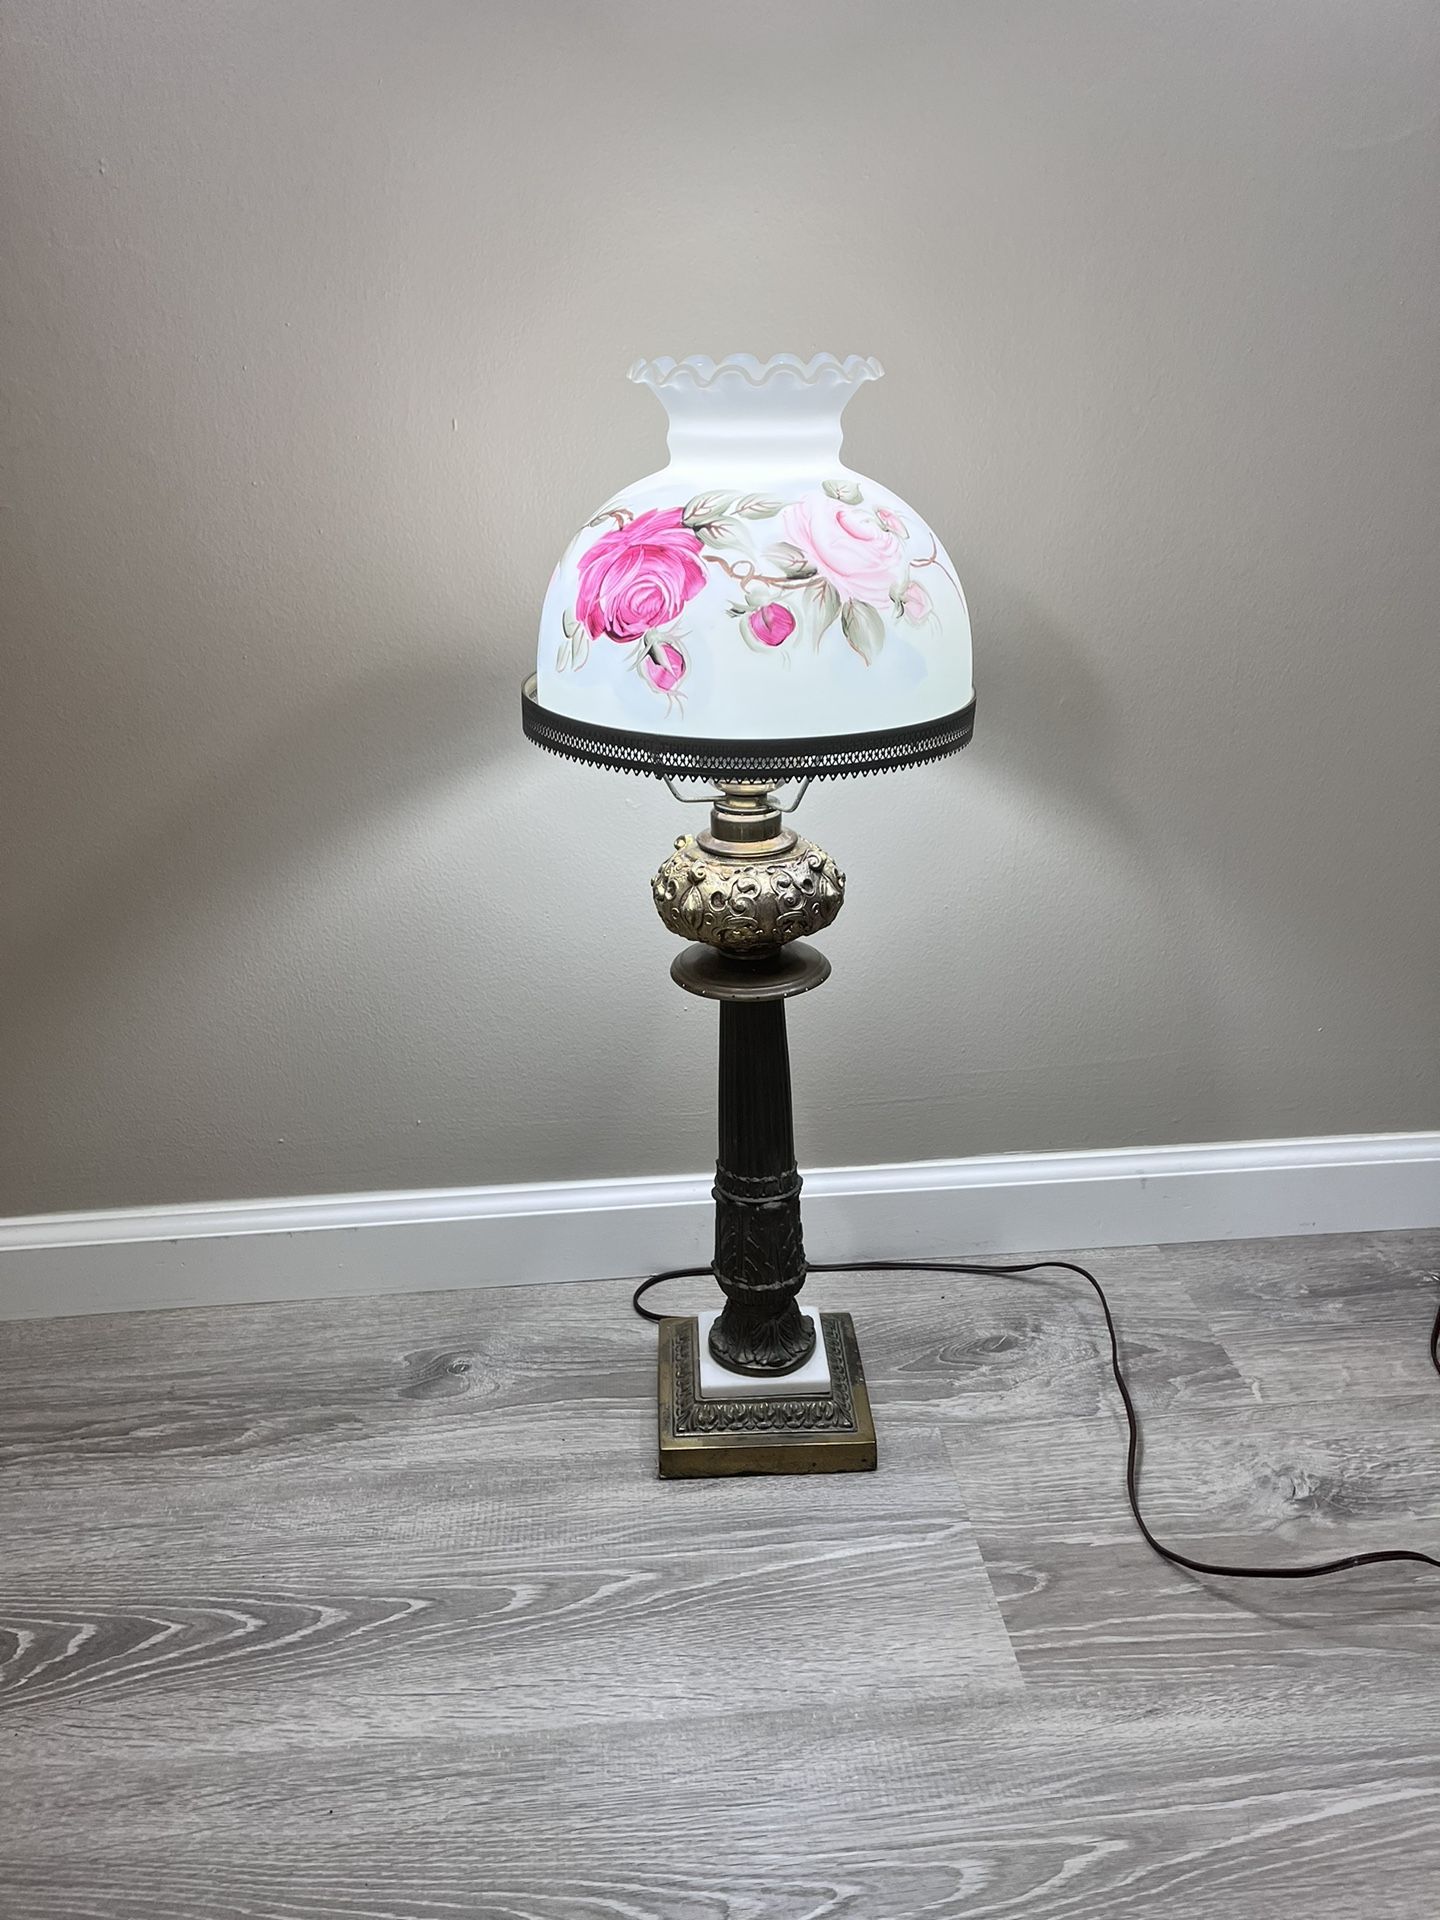 Antique Ticky Baniak Handpainted Floral Pink Roses Scalloped White Ceramic Brass Lamp Shade